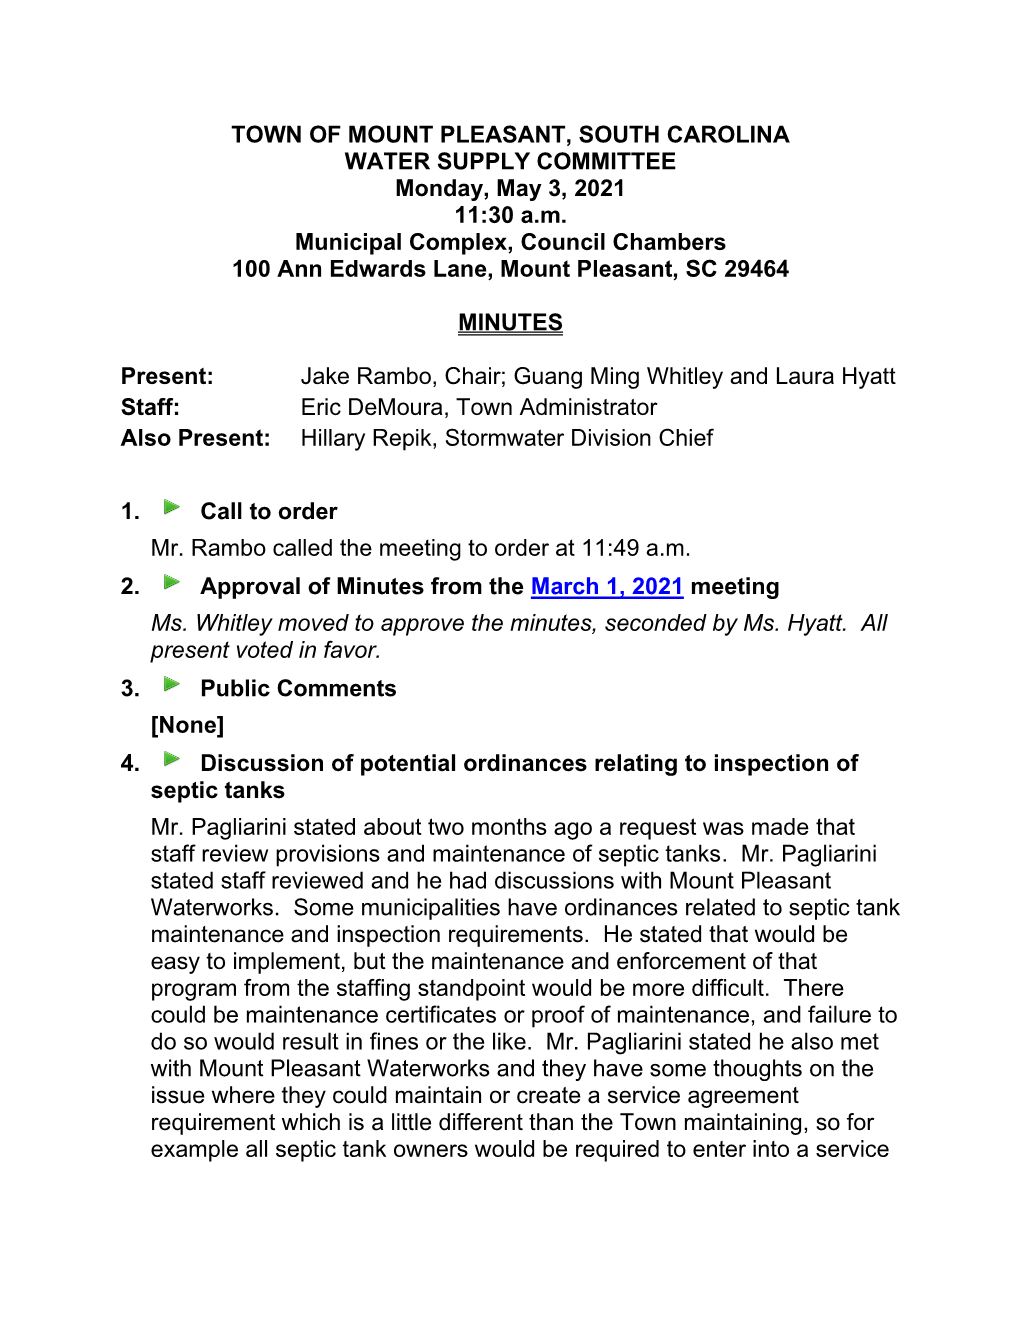 TOWN of MOUNT PLEASANT, SOUTH CAROLINA WATER SUPPLY COMMITTEE Monday, May 3, 2021 11:30 A.M